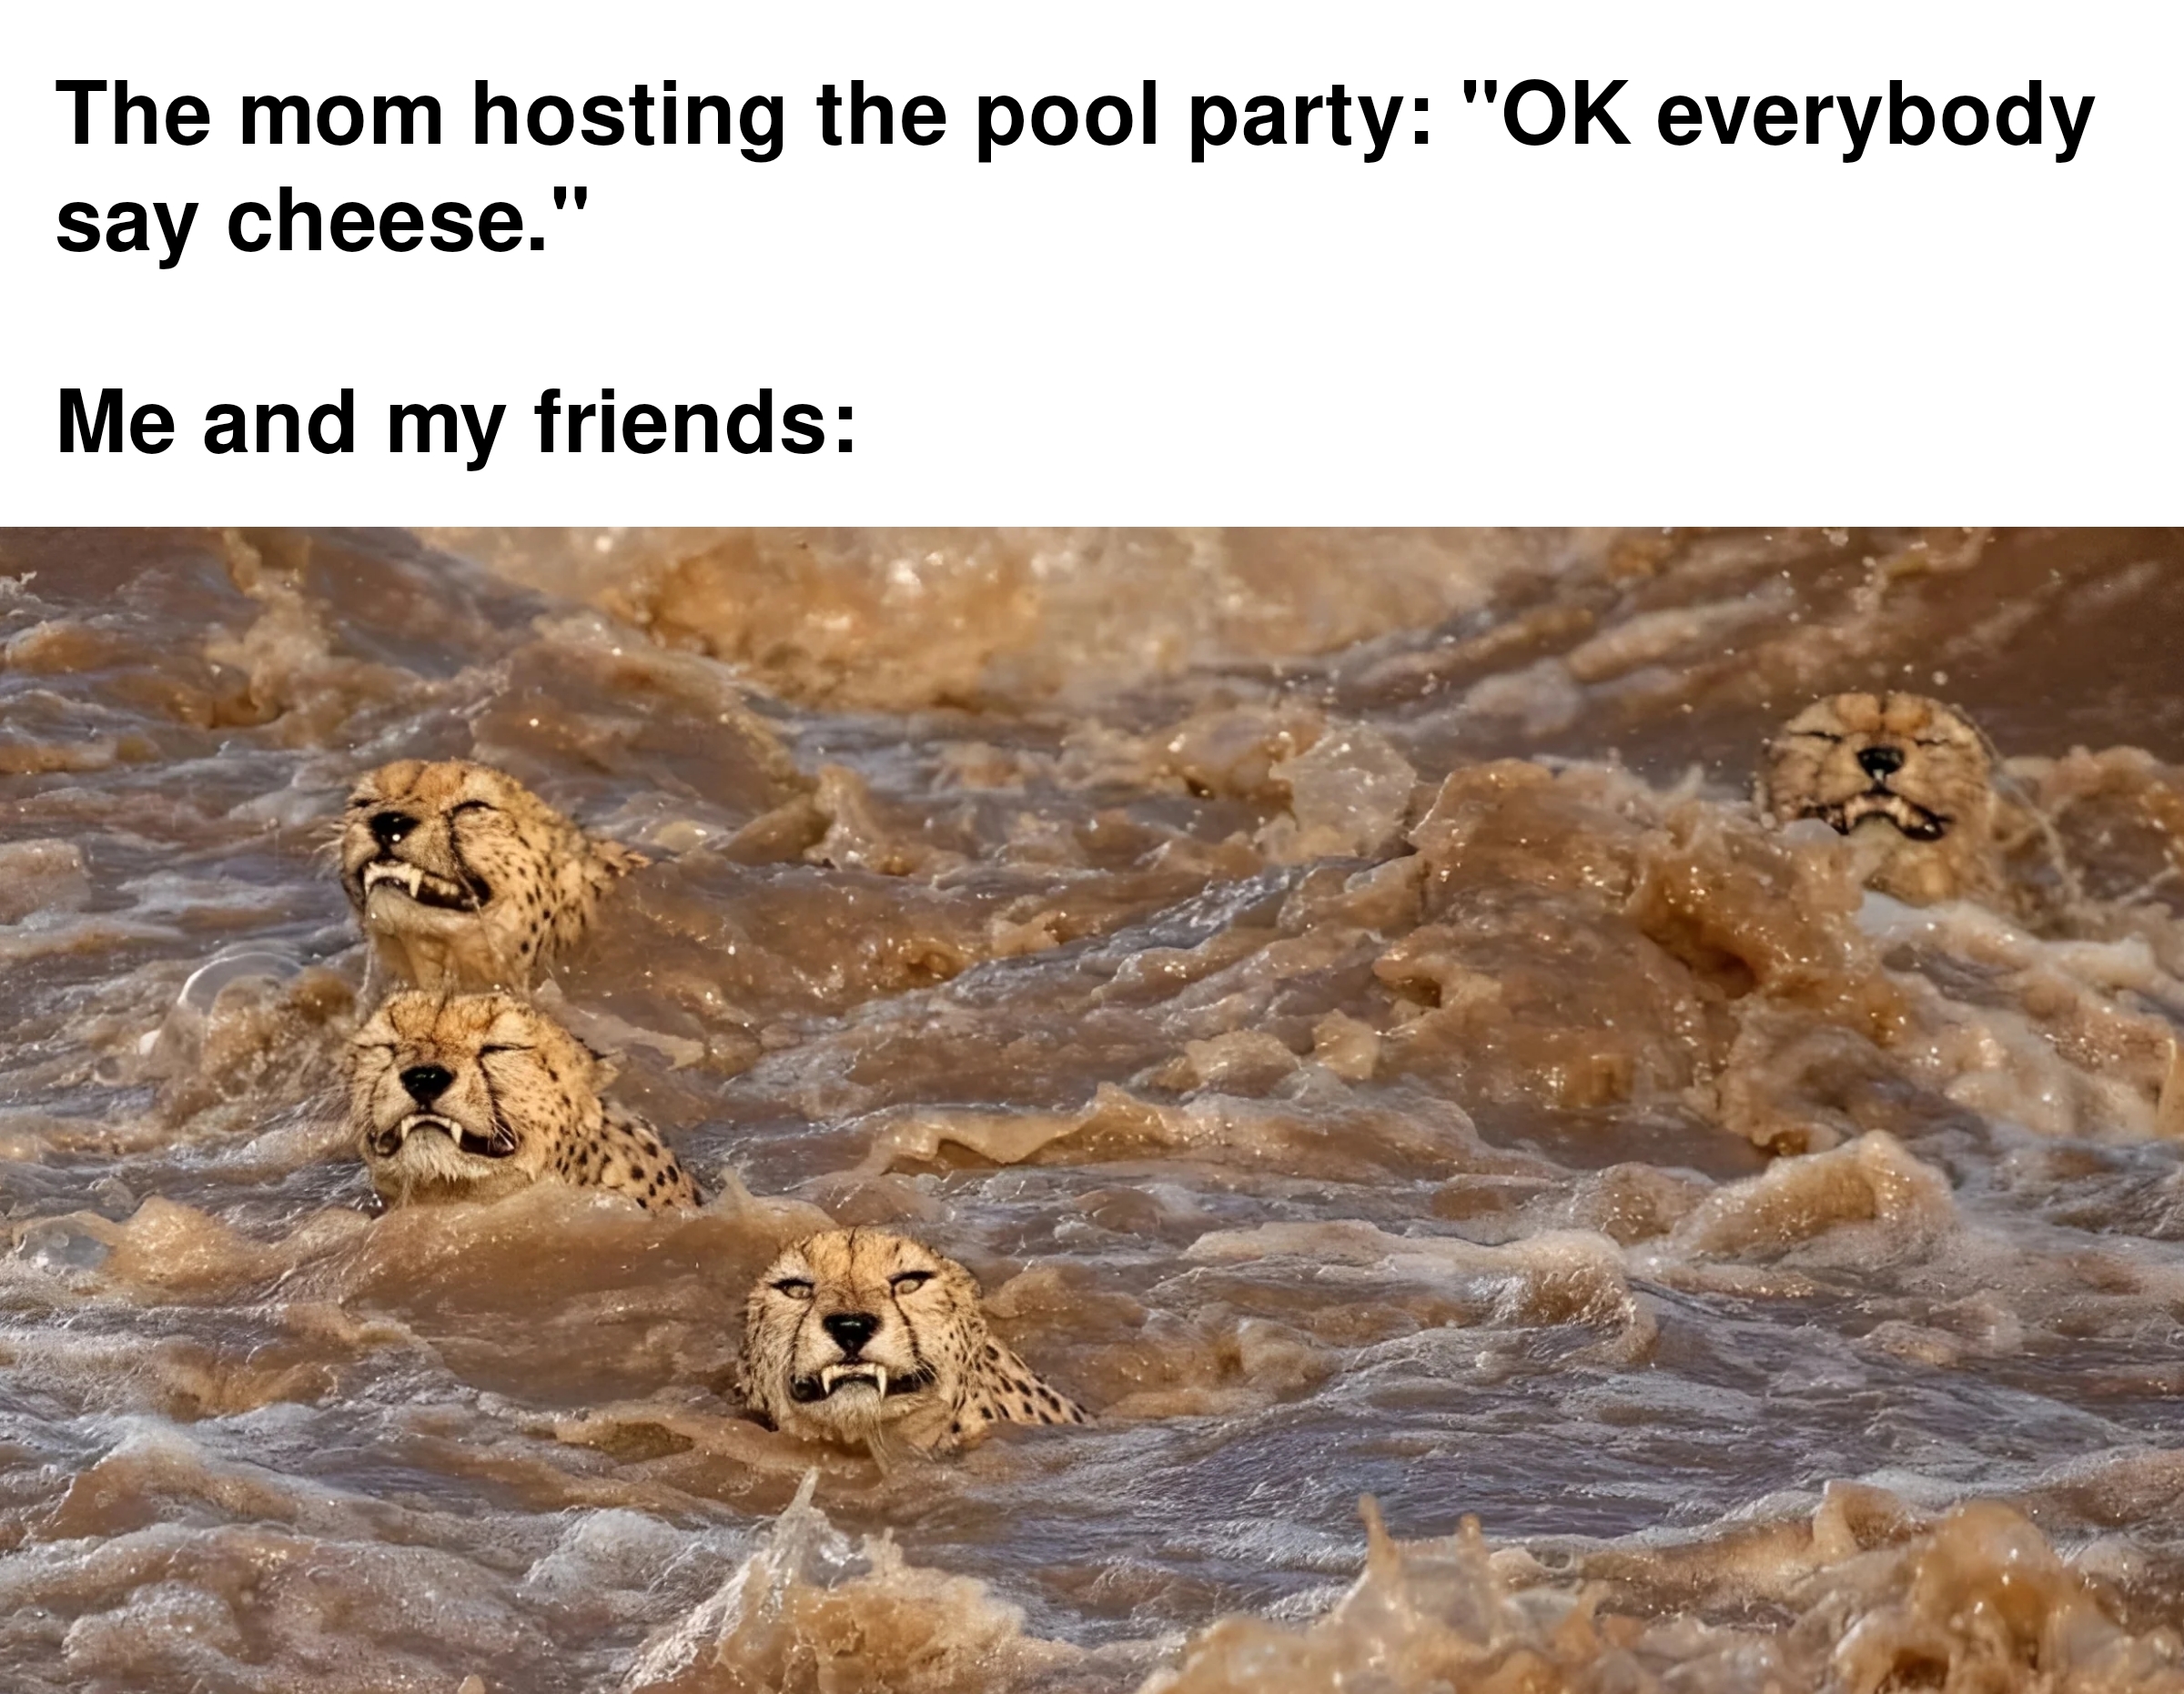 funny memes and pics - cheetahs crossing river - The mom hosting the pool party "Ok everybody say cheese." Me and my friends